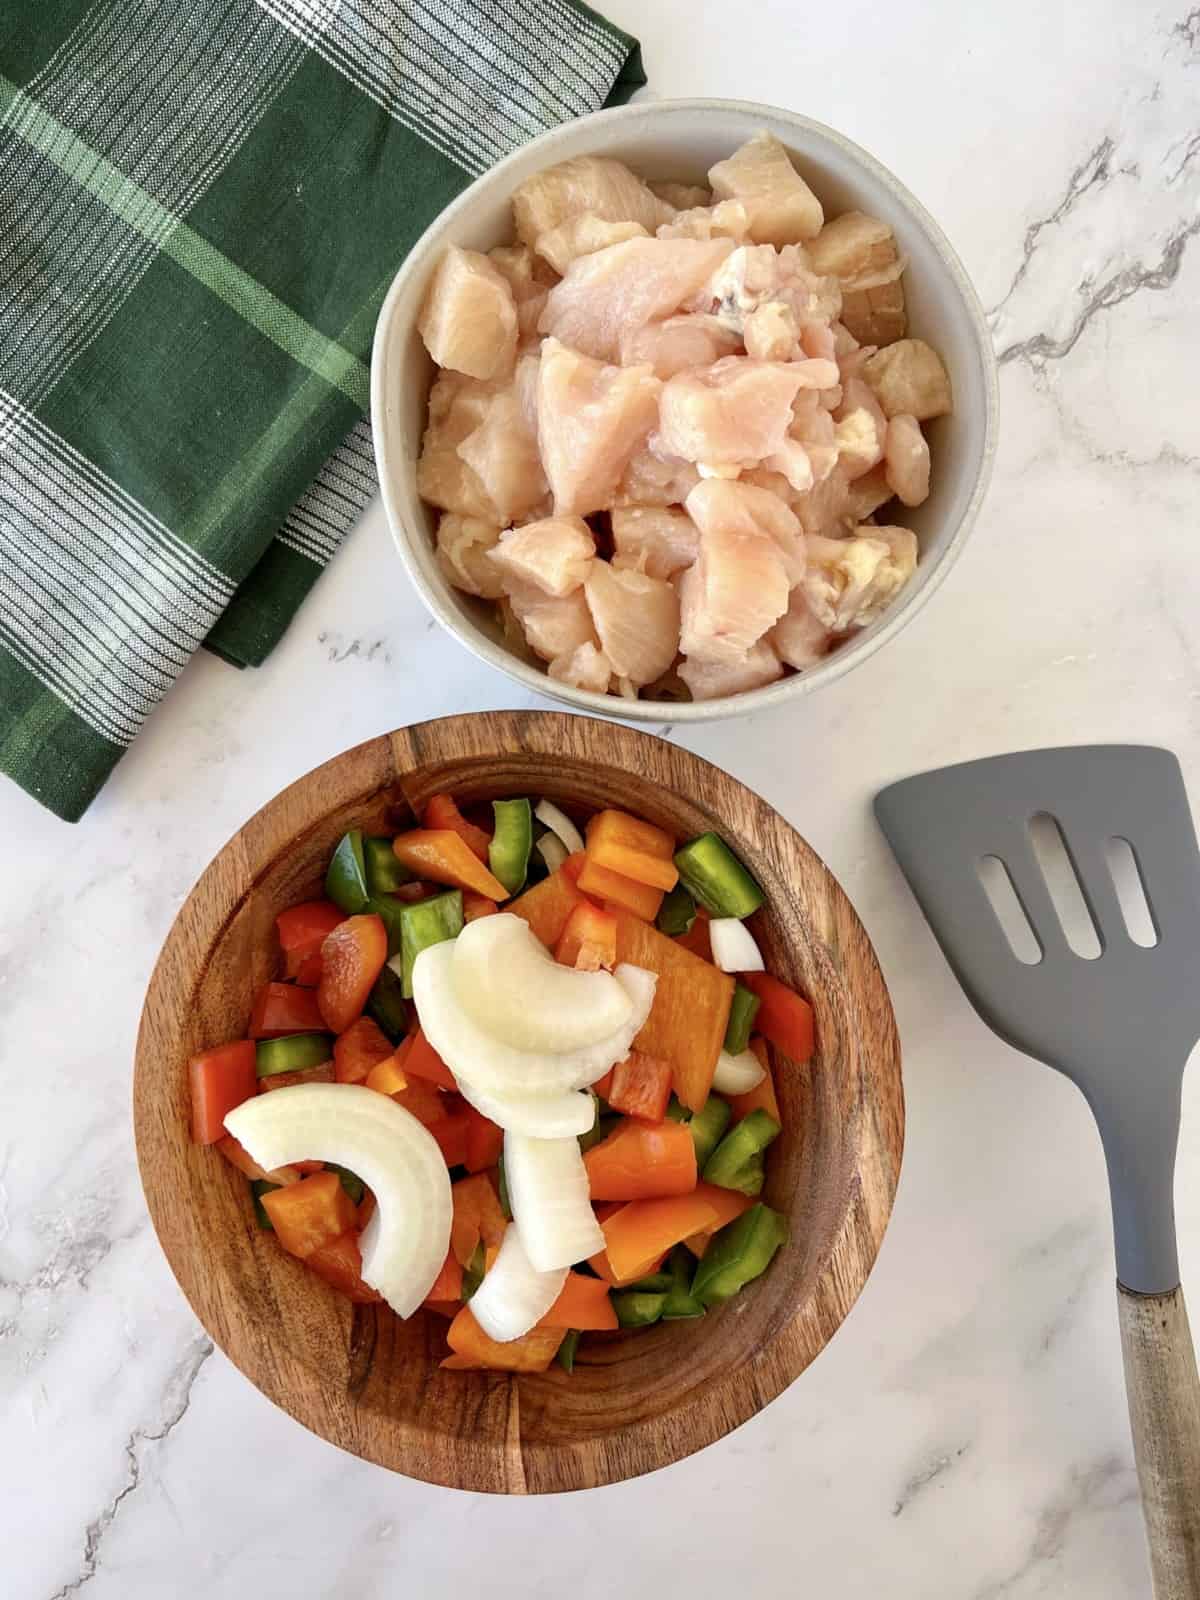 chopped veggies in a bowl and chopped chicken